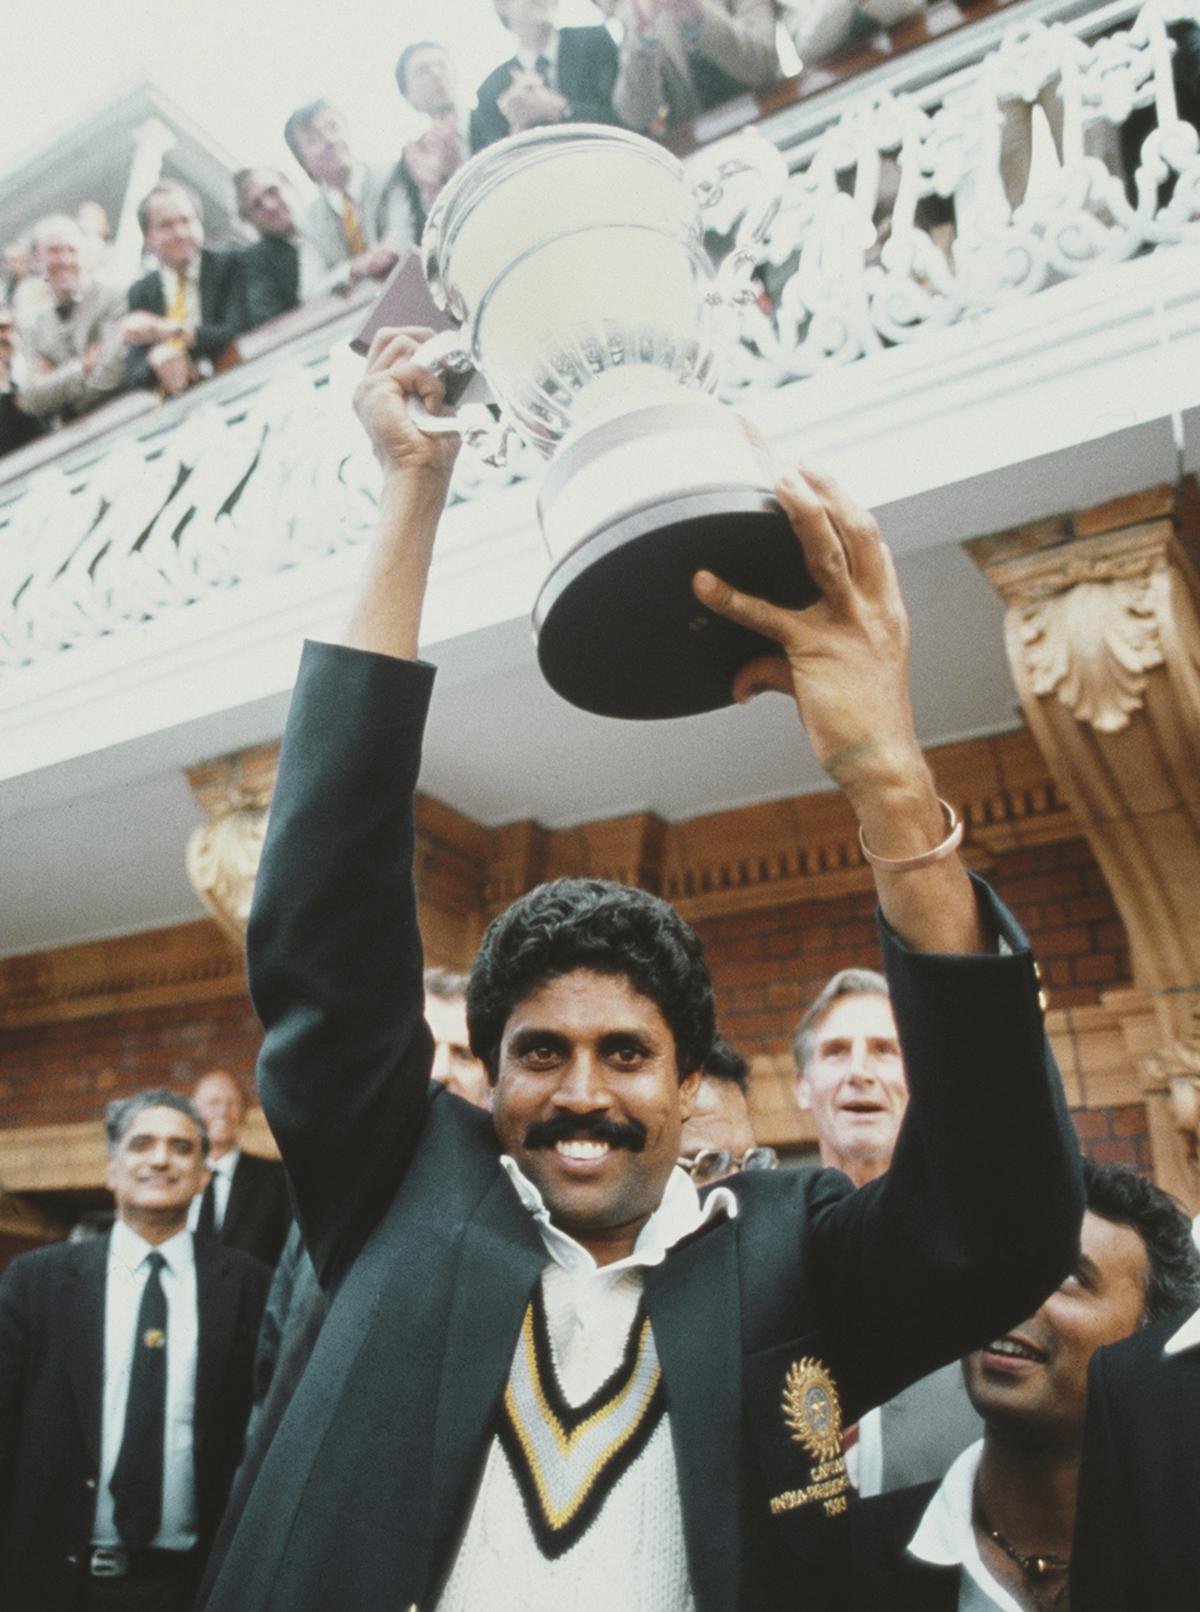 India captain Kapil Dev lifts the trophy on the balcony of the pavilion as Sunil Gavaskar (obscured right) looks on after the 1983 World Cup Final victory against West Indies.